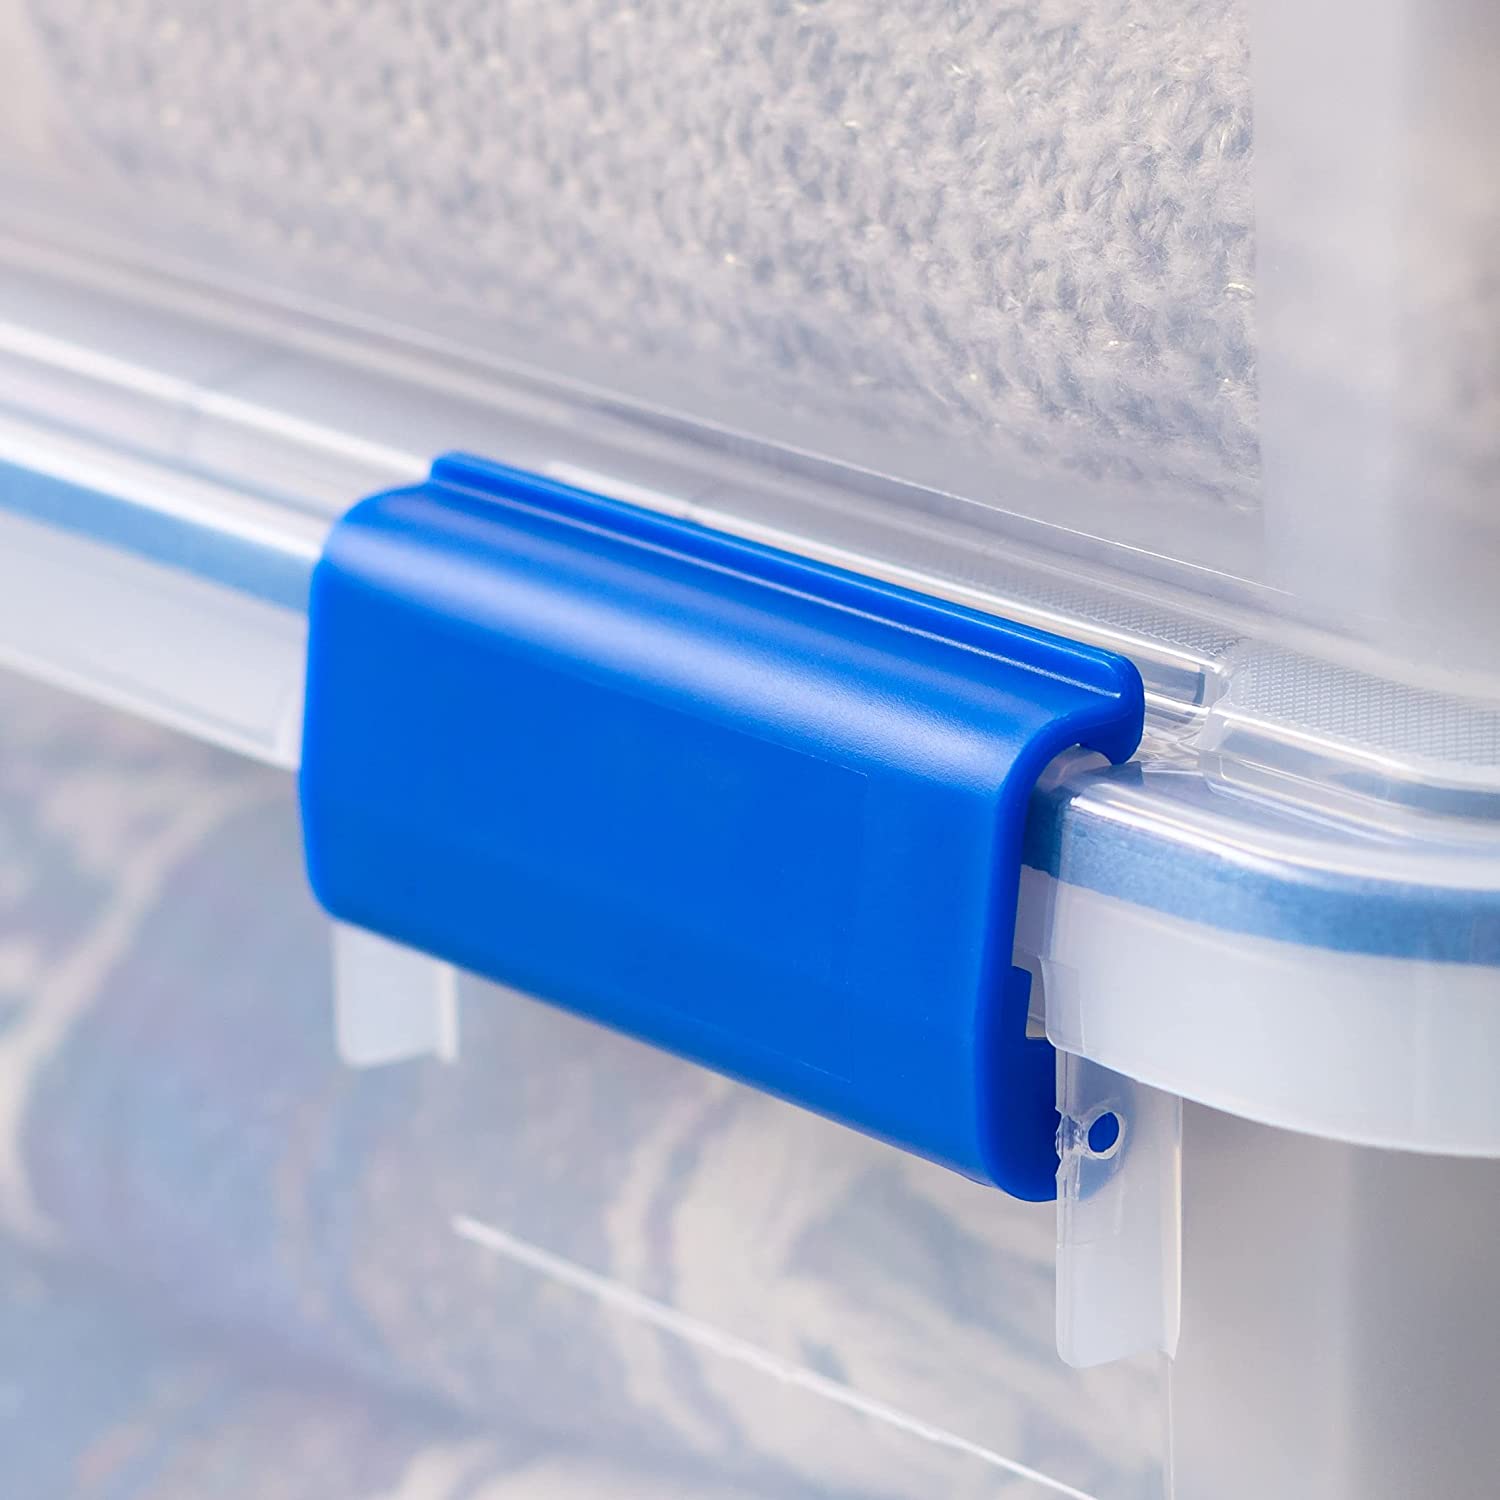 https://bigbigmart.com/wp-content/uploads/2023/06/IRIS-USA-30-Quart-WEATHERPRO-Plastic-Storage-Box-with-Durable-Lid-and-Seal-and-Secure-Latching-Buckles-Clear-With-Blue-Buckles-Weathertight-3-Pack5-1.jpg